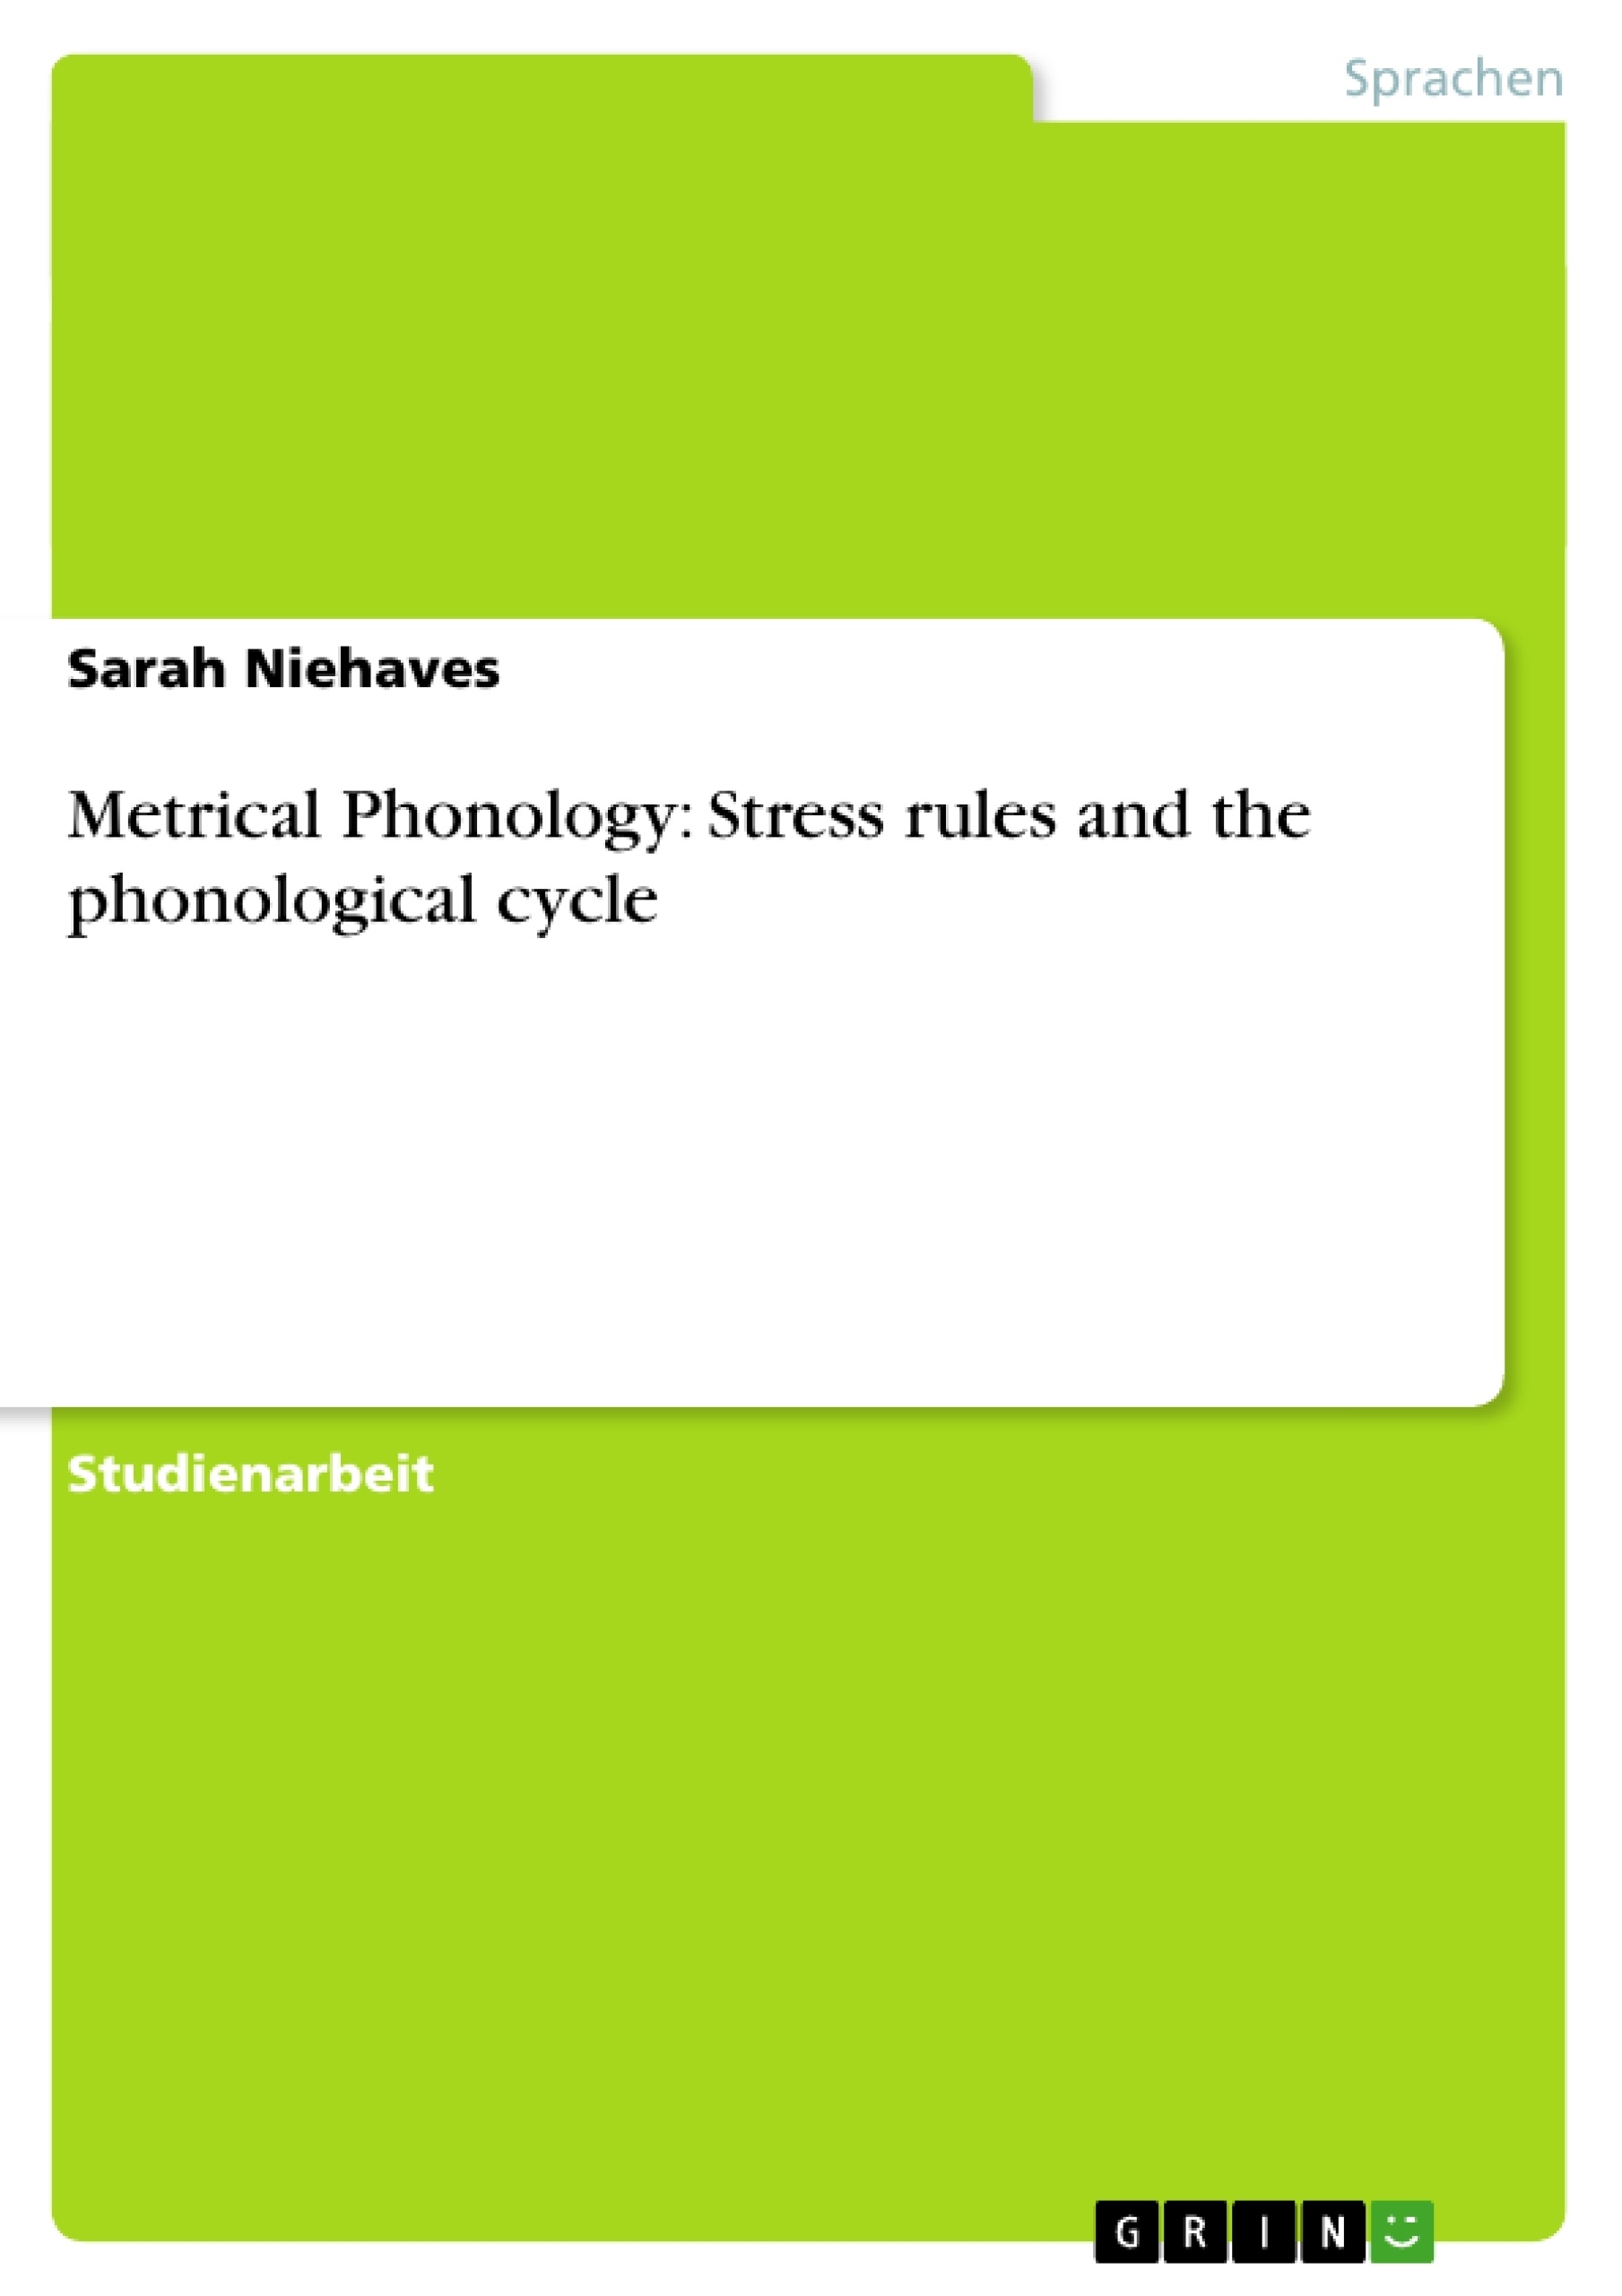 Titel: Metrical Phonology: Stress rules and the phonological cycle